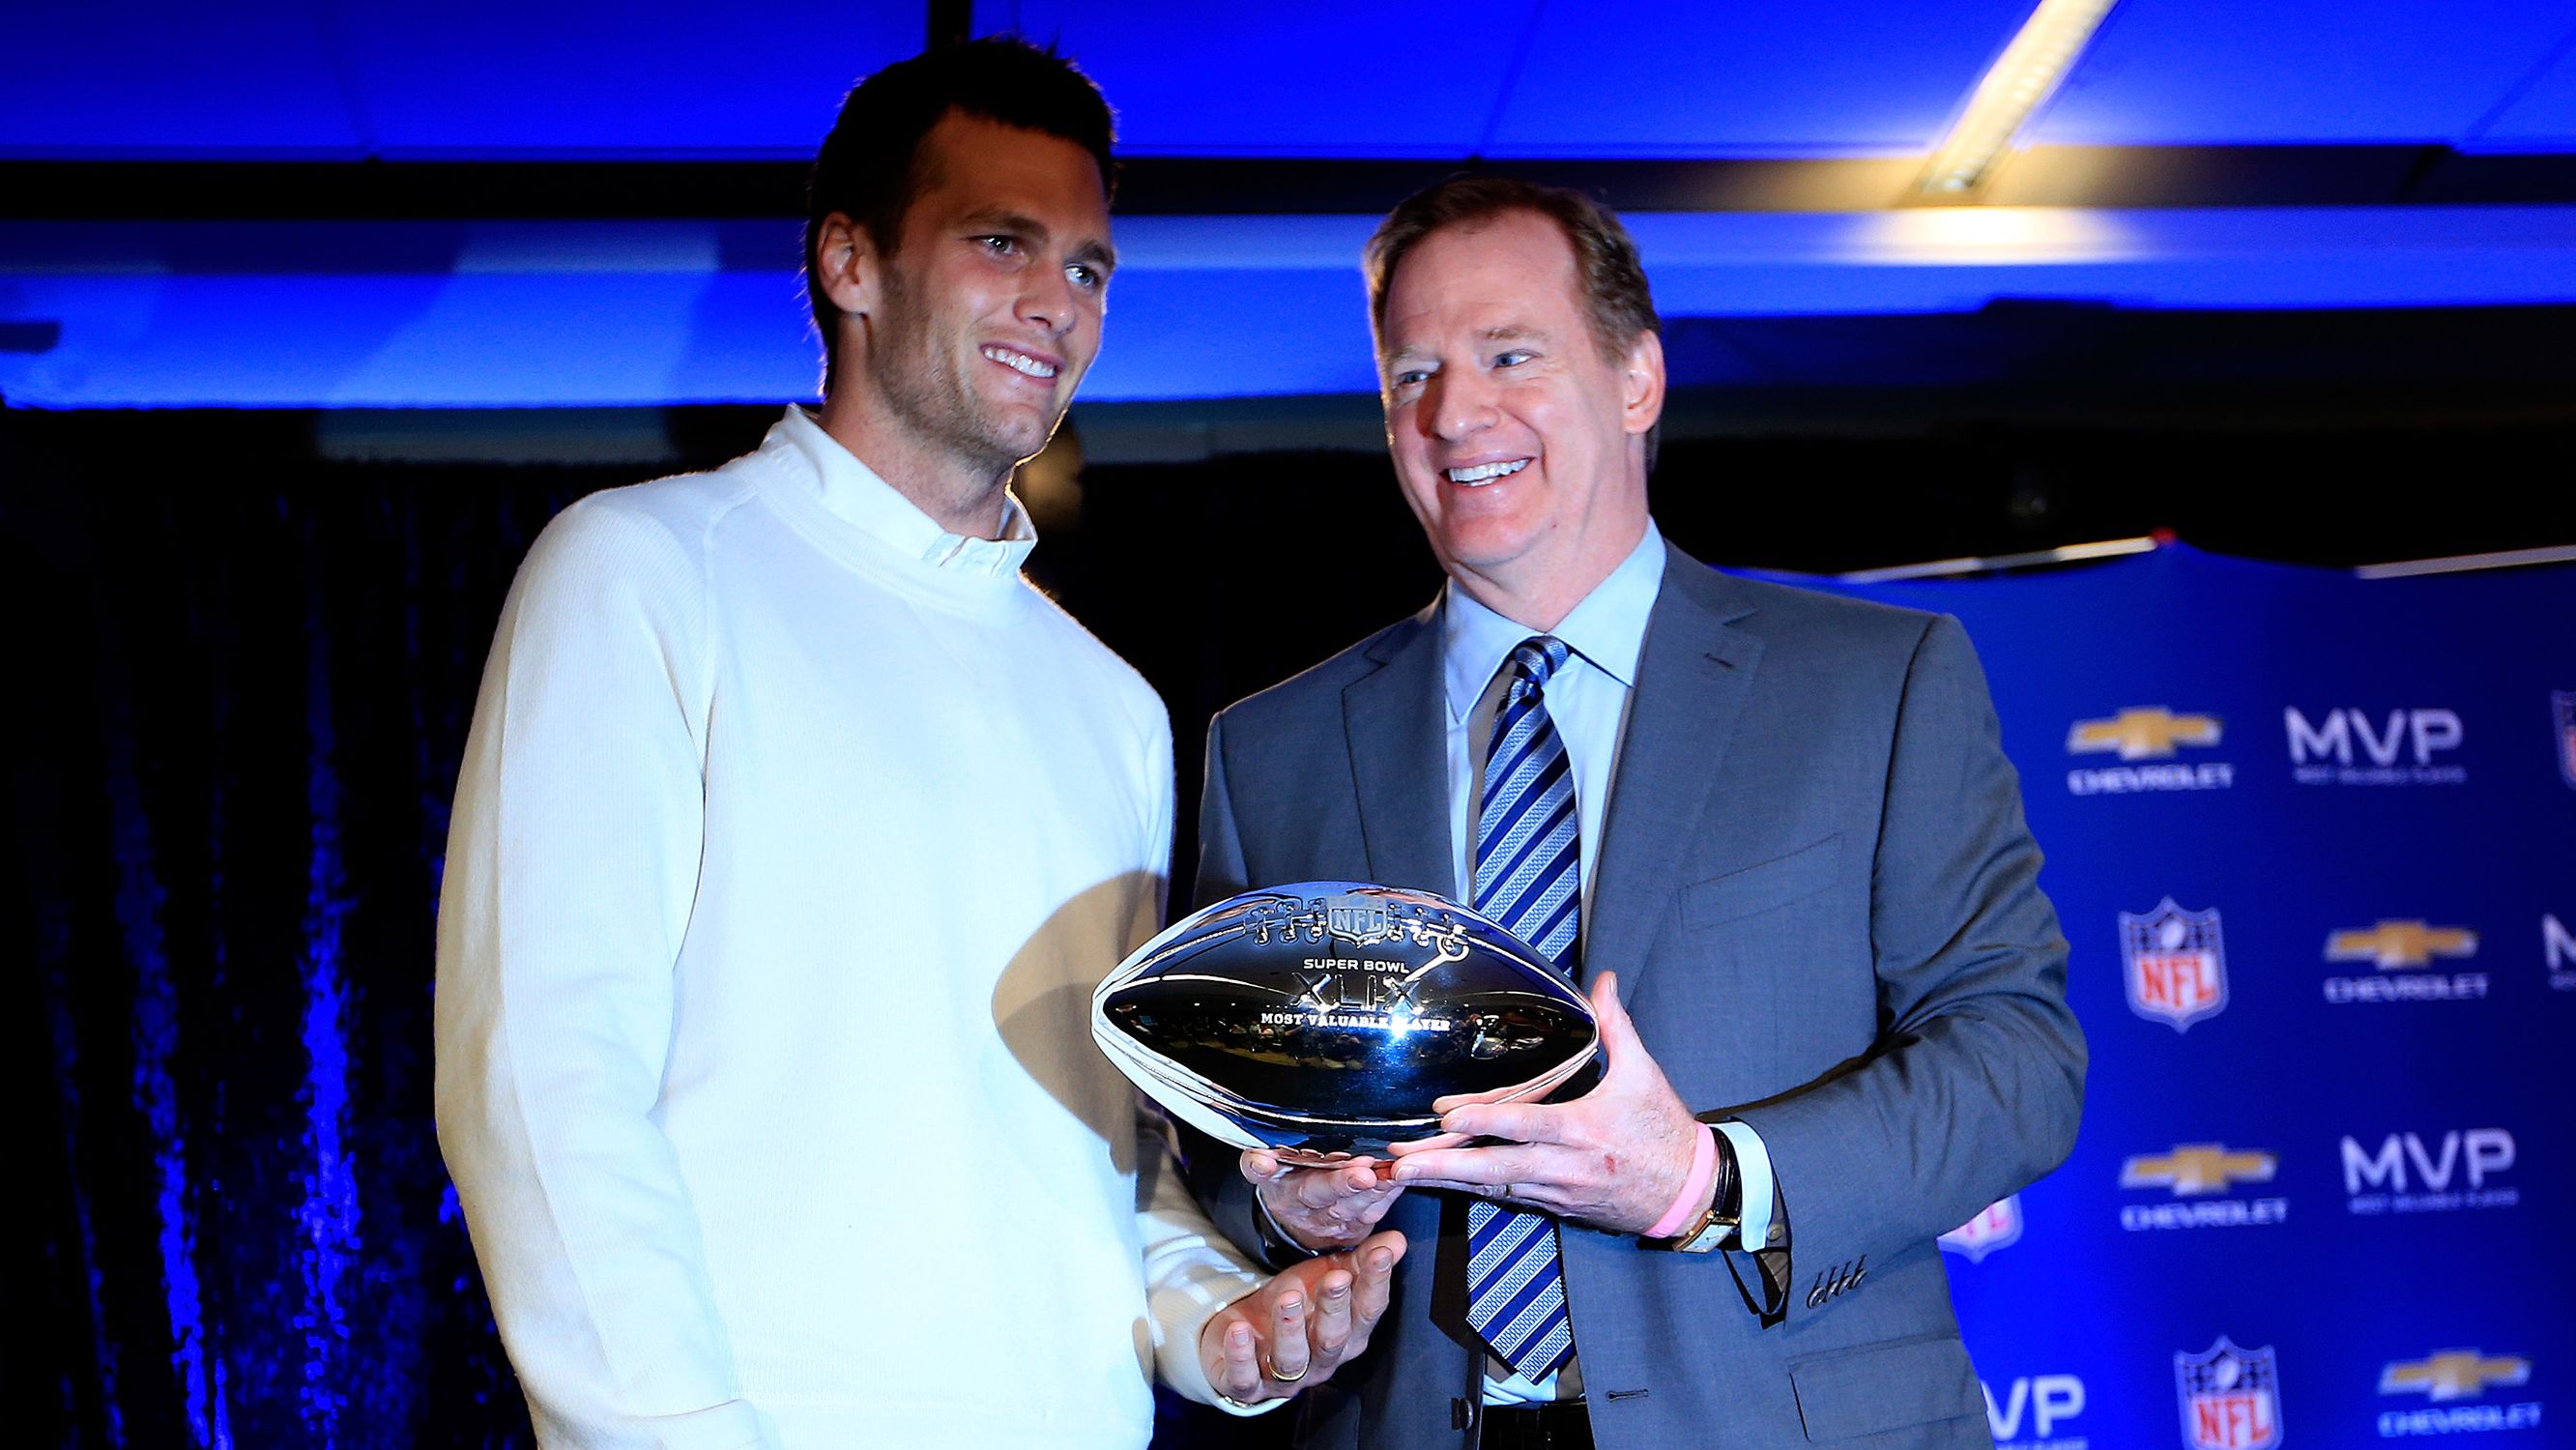 Brady with Goodell and the Super Bowl XLIX MVP trophy during a press conference folowing the New England Patriots Super Bowl win over the Seattle Seahawks on February 2, 2015.